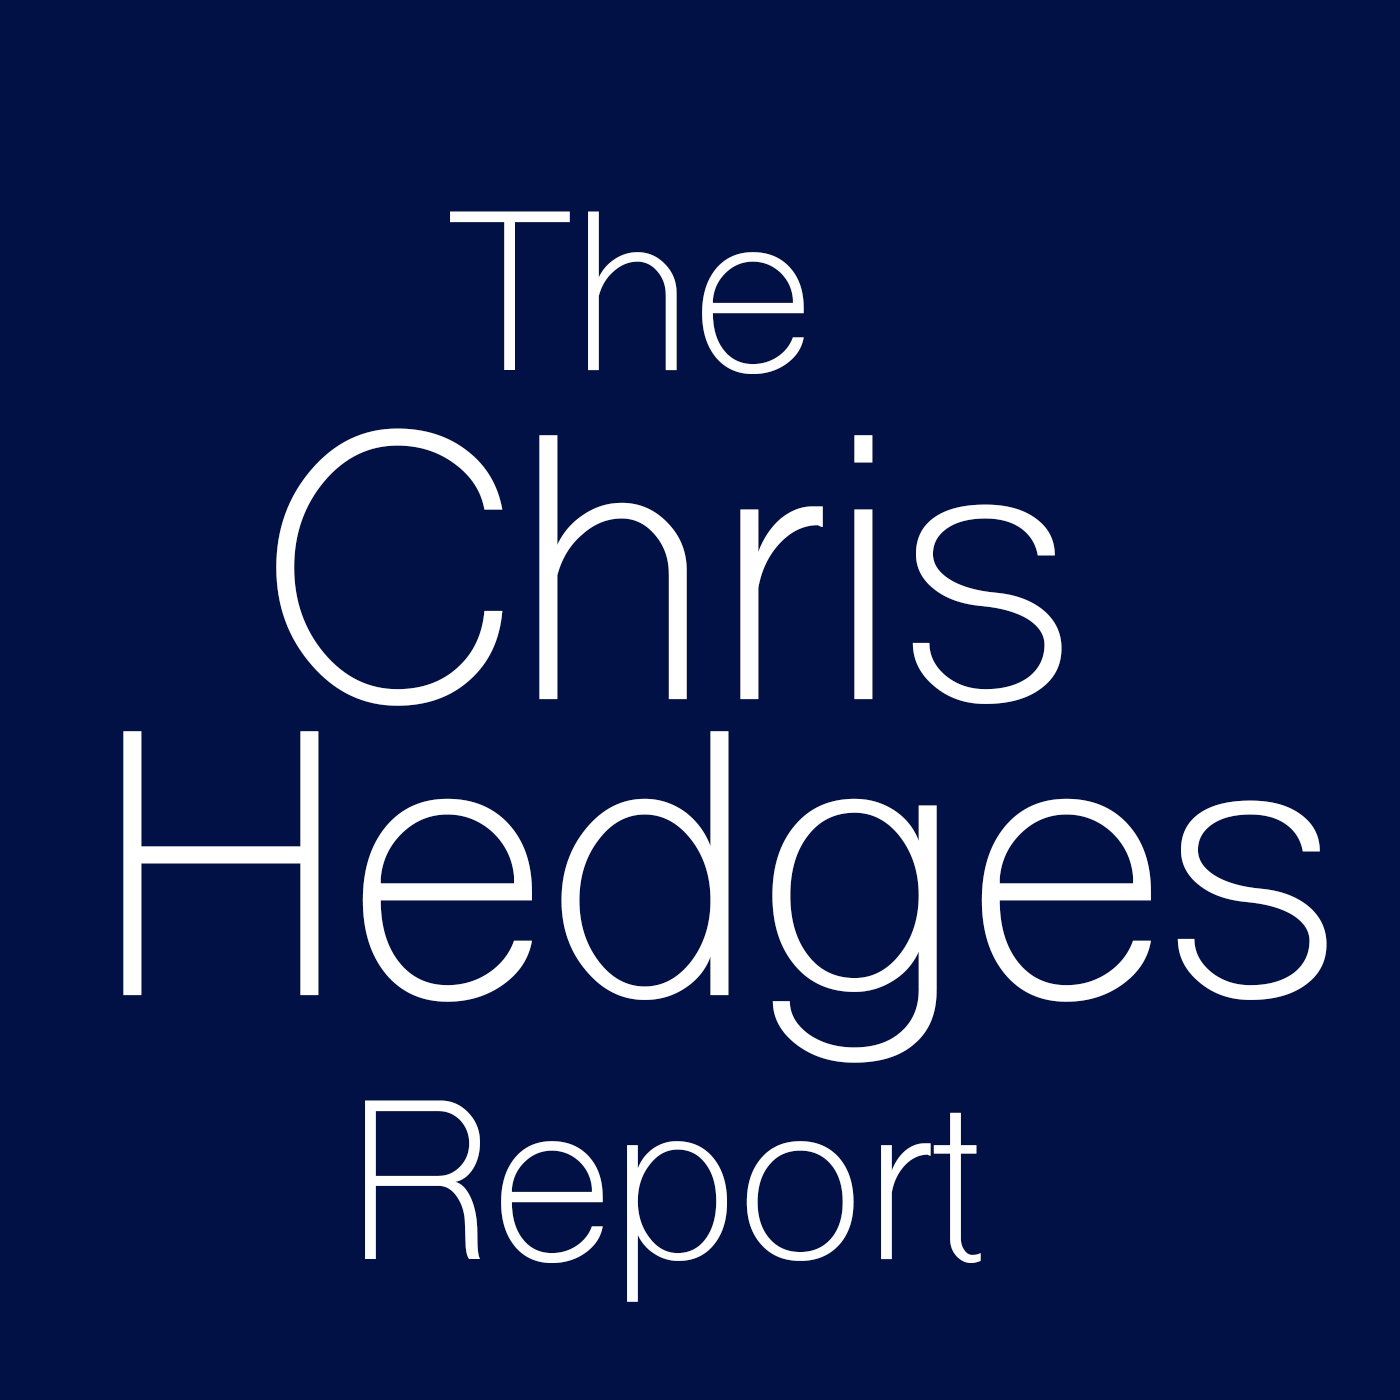 The Chris Hedges Report Podcast with actor Eunice Wong and director David Herskovits on William Shakespeare as Oracle and their new production of Shakespeare's play Pericles